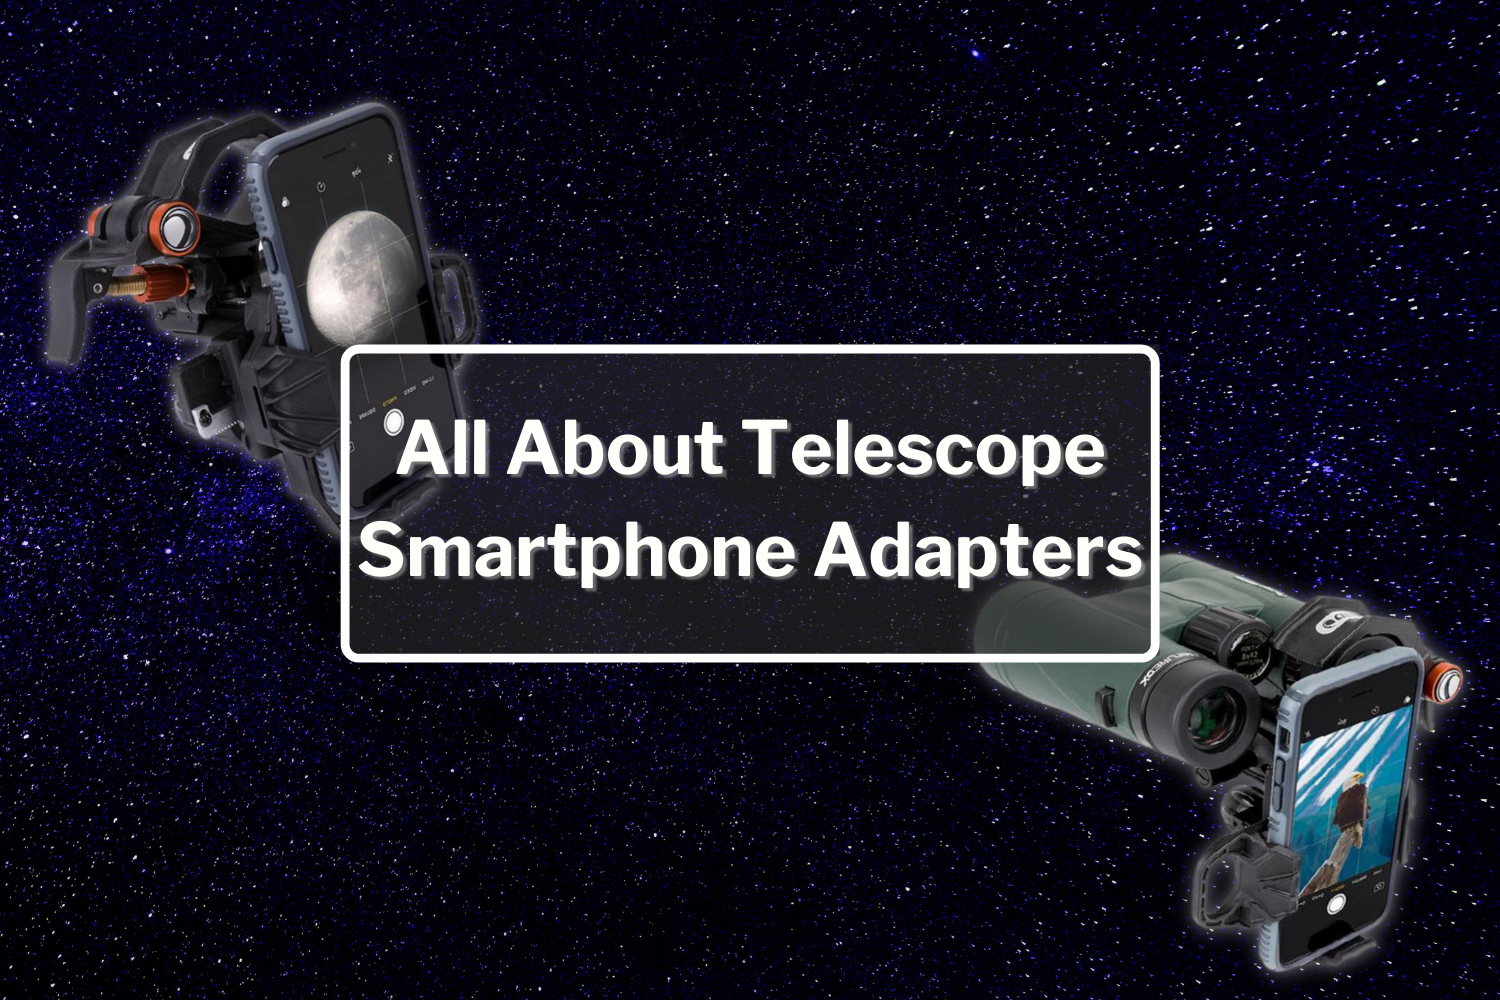 All About Telescope Smartphone Adapters